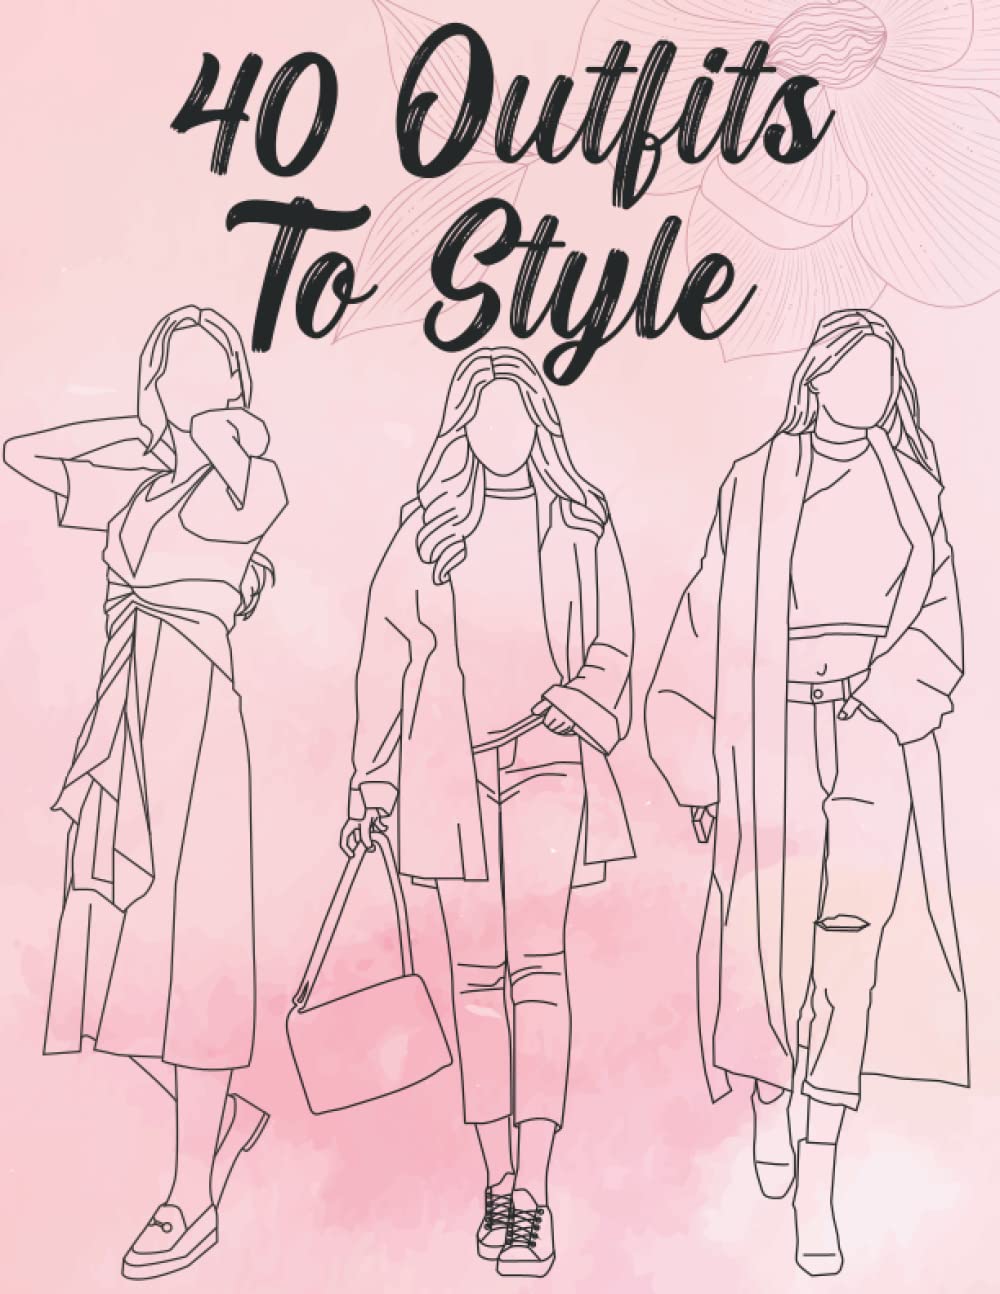 Mua 40 Outfits To Style: Design Your Style Workbook - Modern Casual Runway  Clothing To Design & Color - Fashion Coloring Book For Adults, Kids and  Teens, Young Artists & Fashion Designers